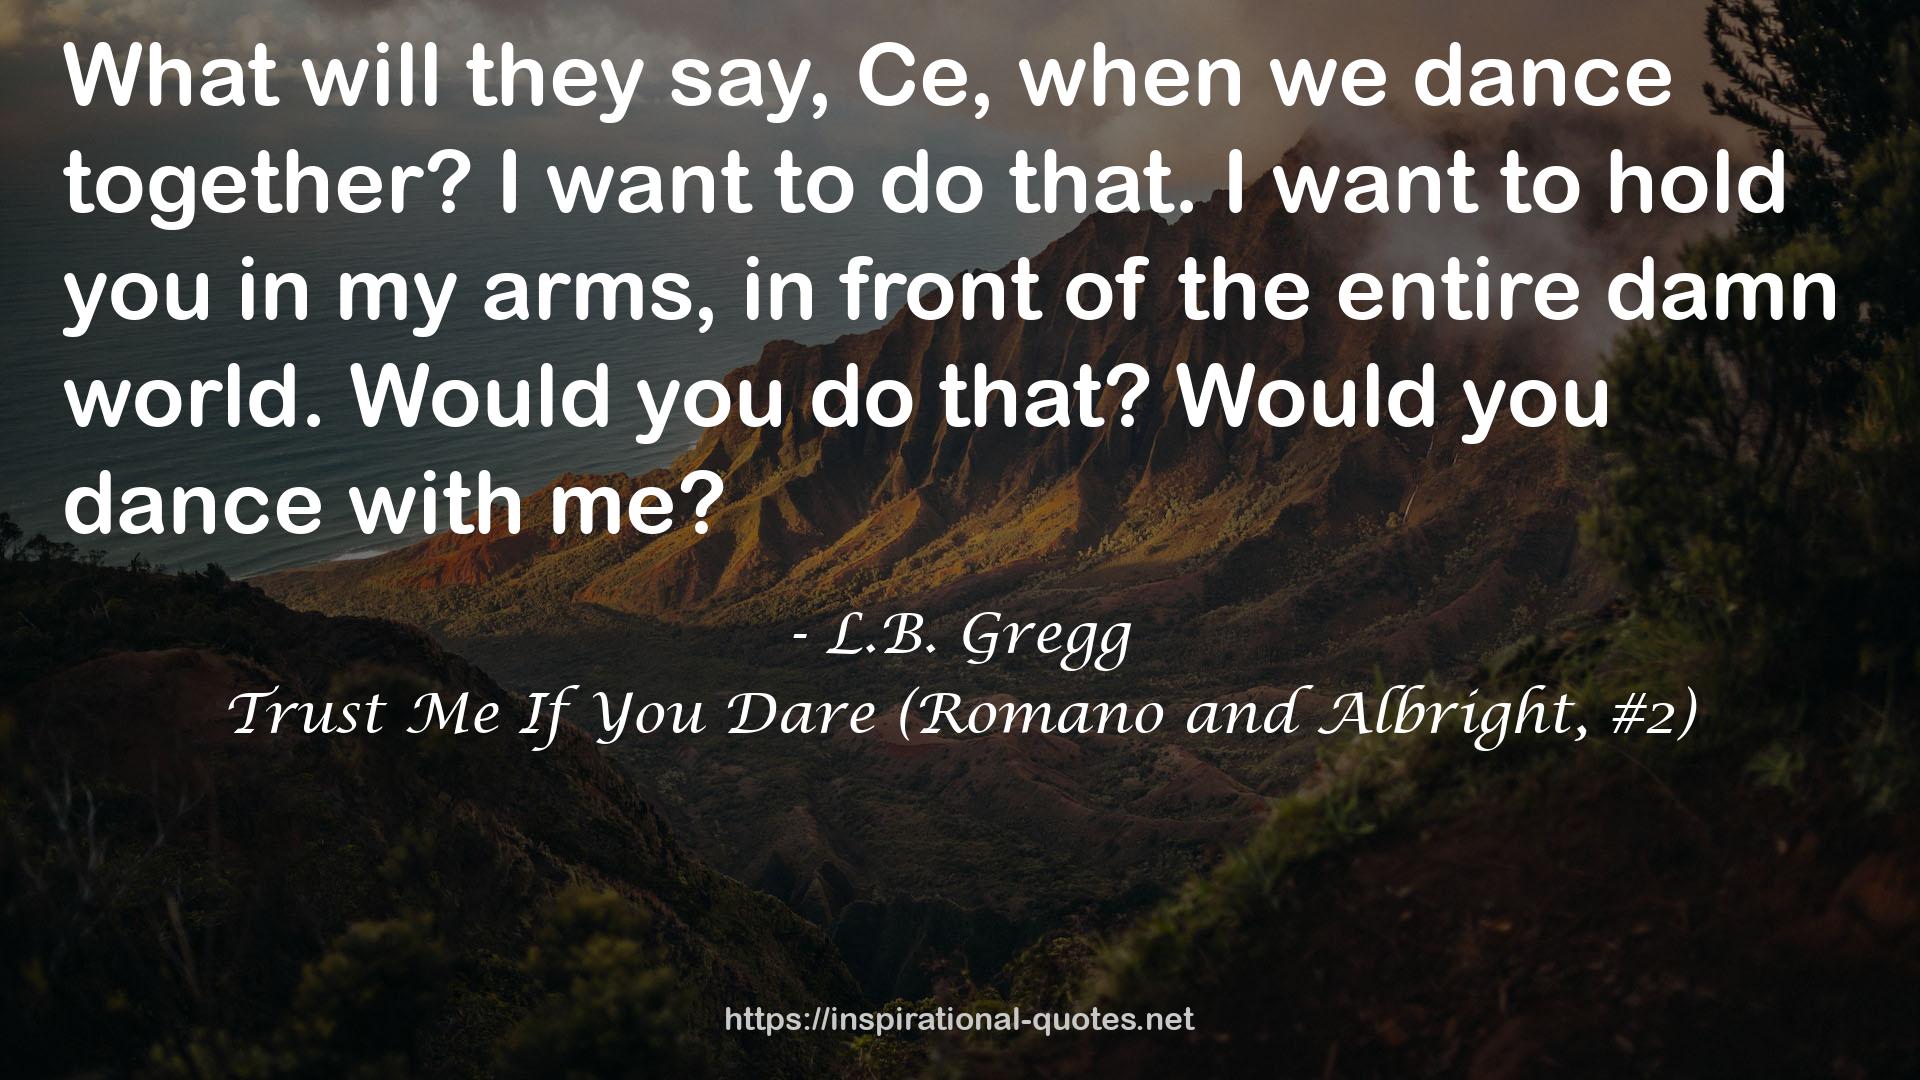 Trust Me If You Dare (Romano and Albright, #2) QUOTES